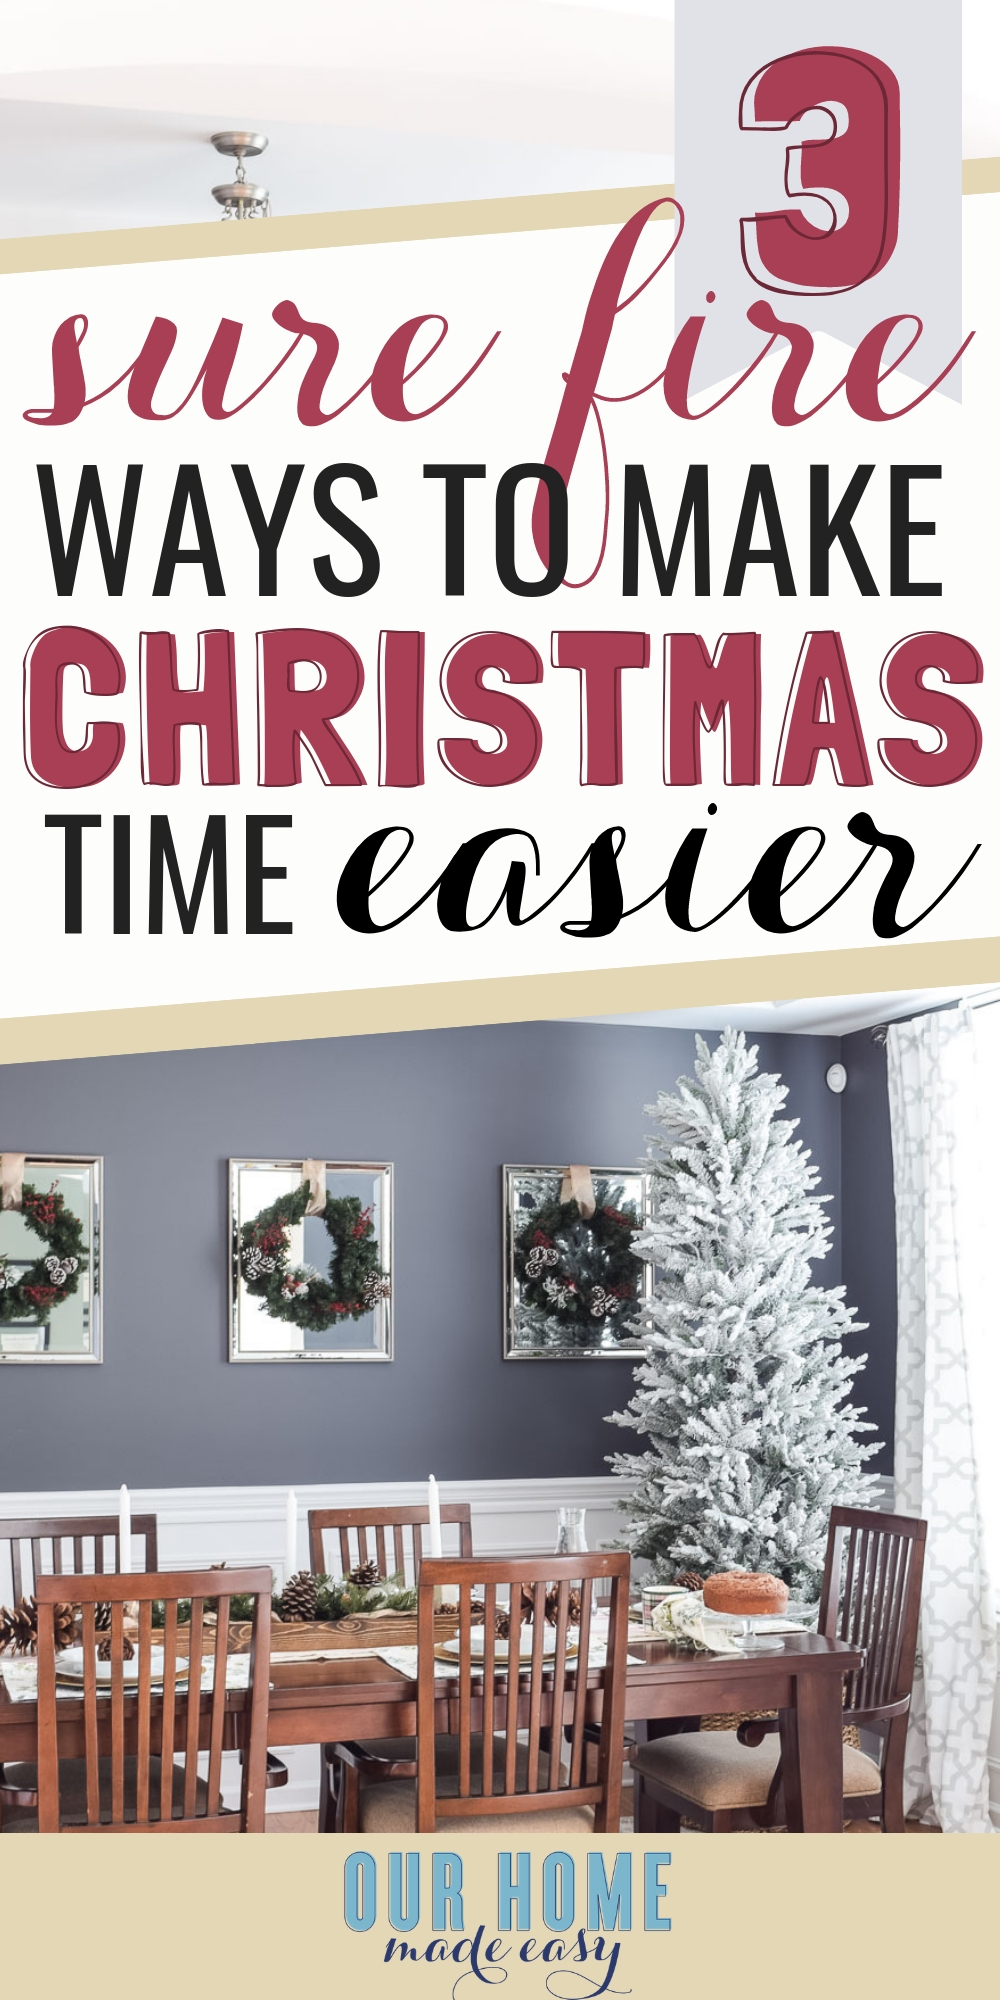 Christmas have you feeling overwhelmed? I wanted to share 3 reasons why you should & how to make life easier this Christmas! #christmas #parenting